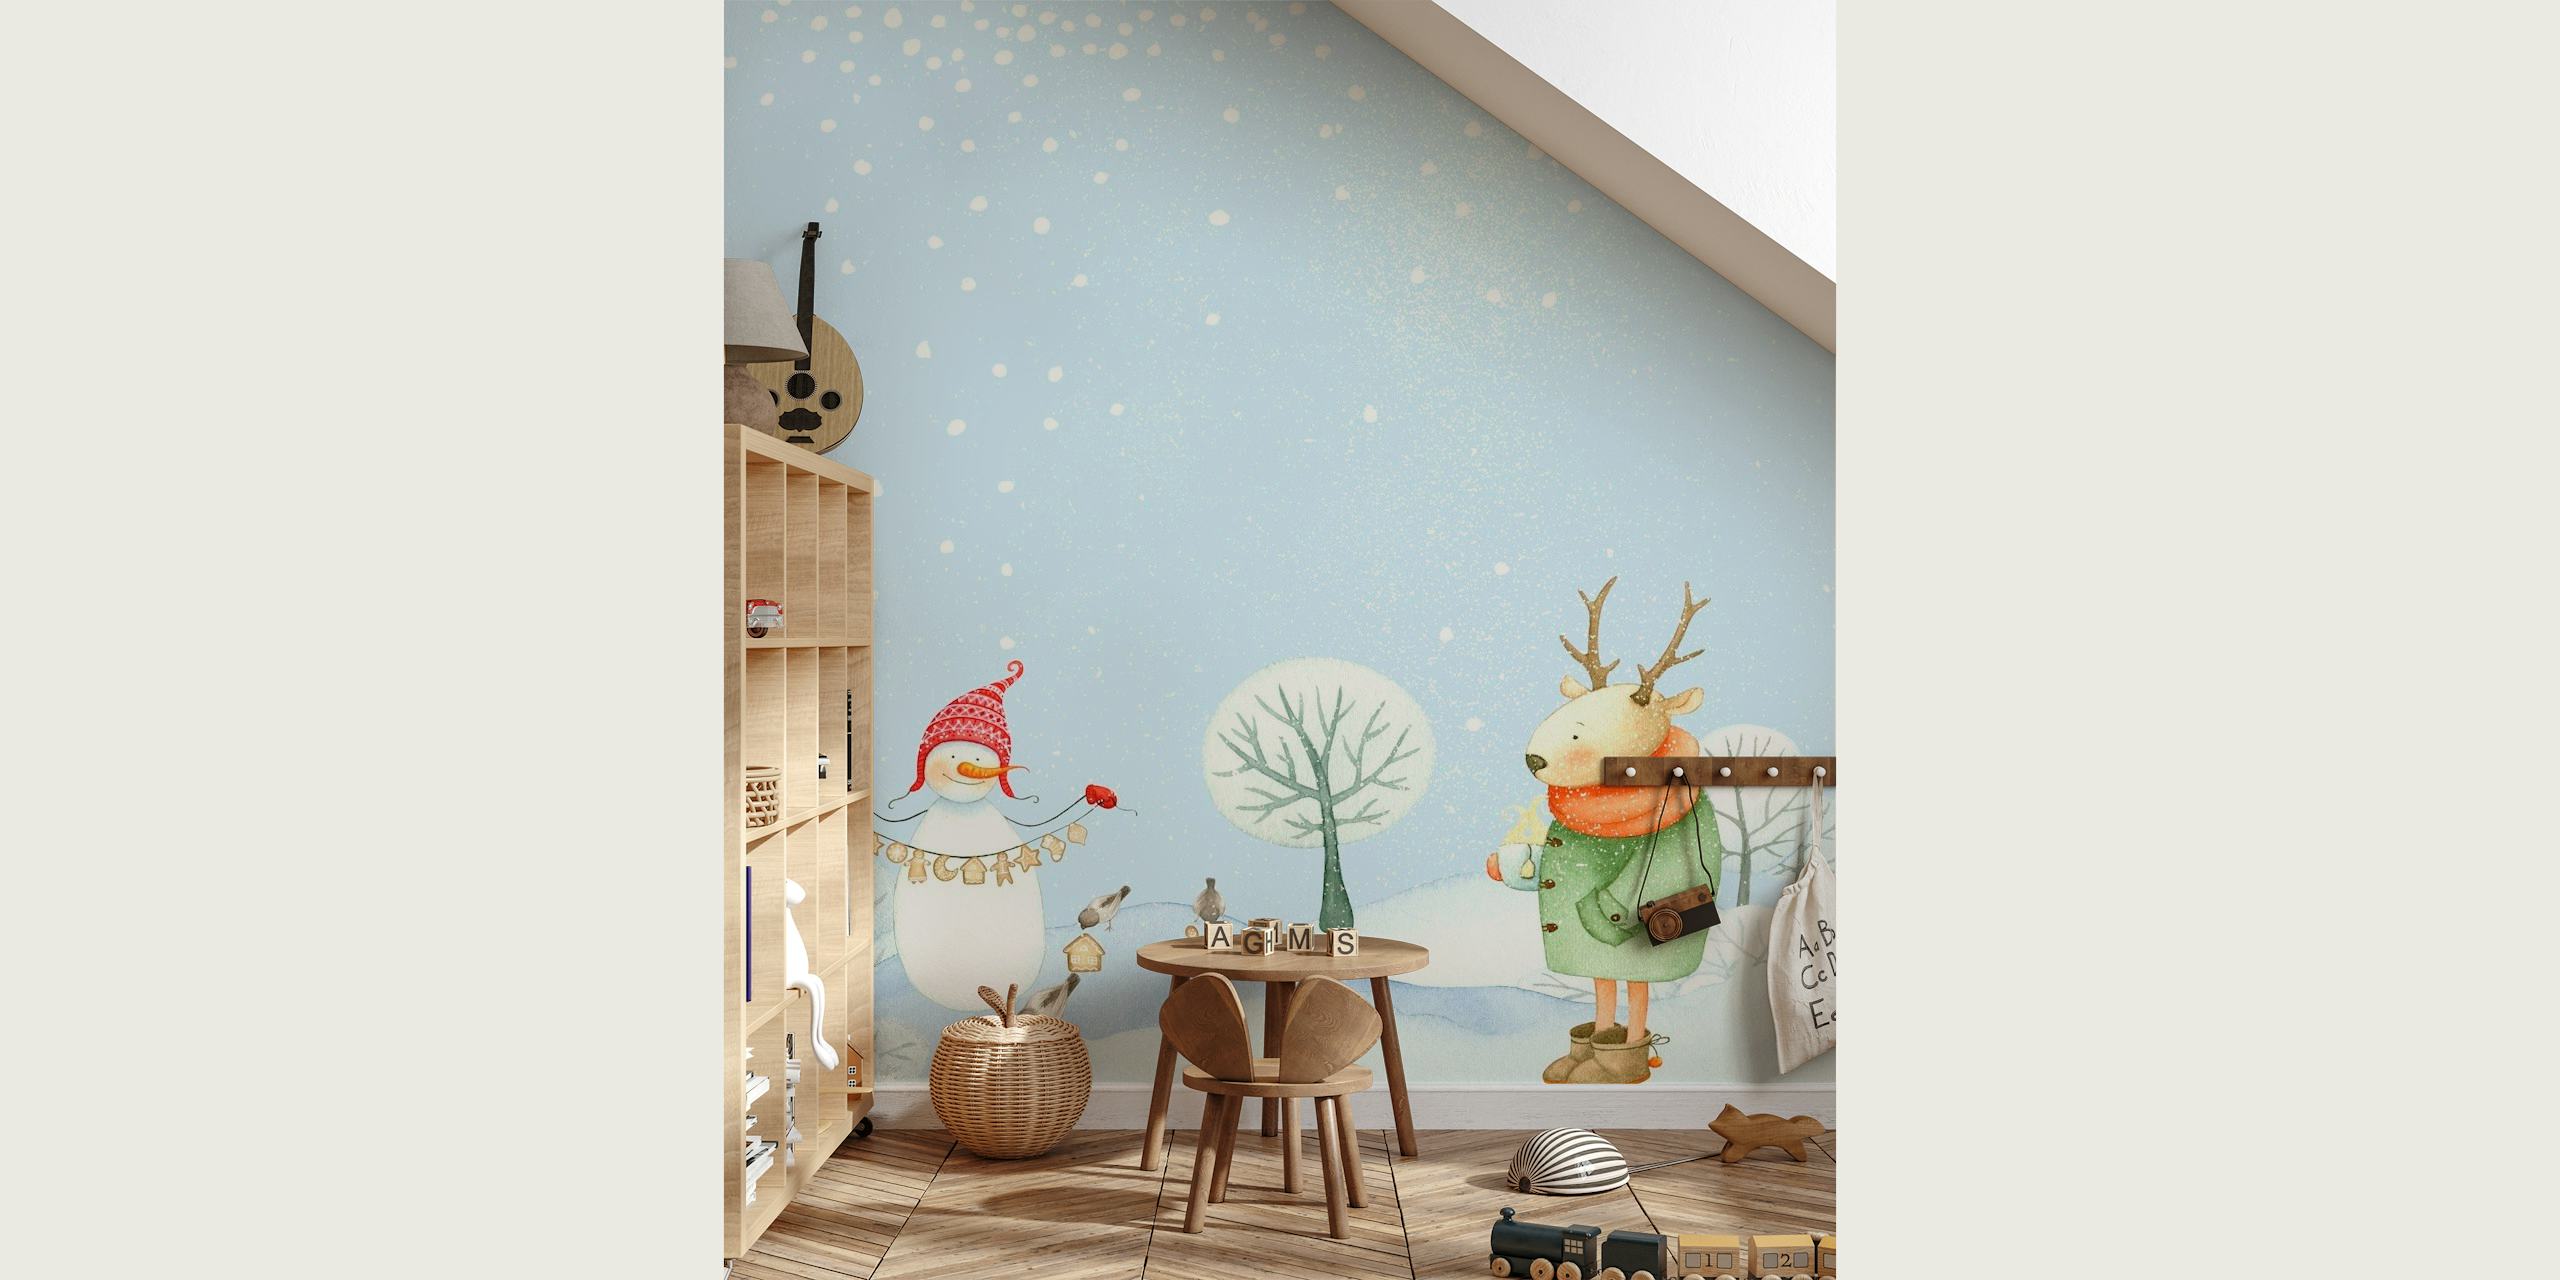 Snowman and deer in a winter scene wall mural